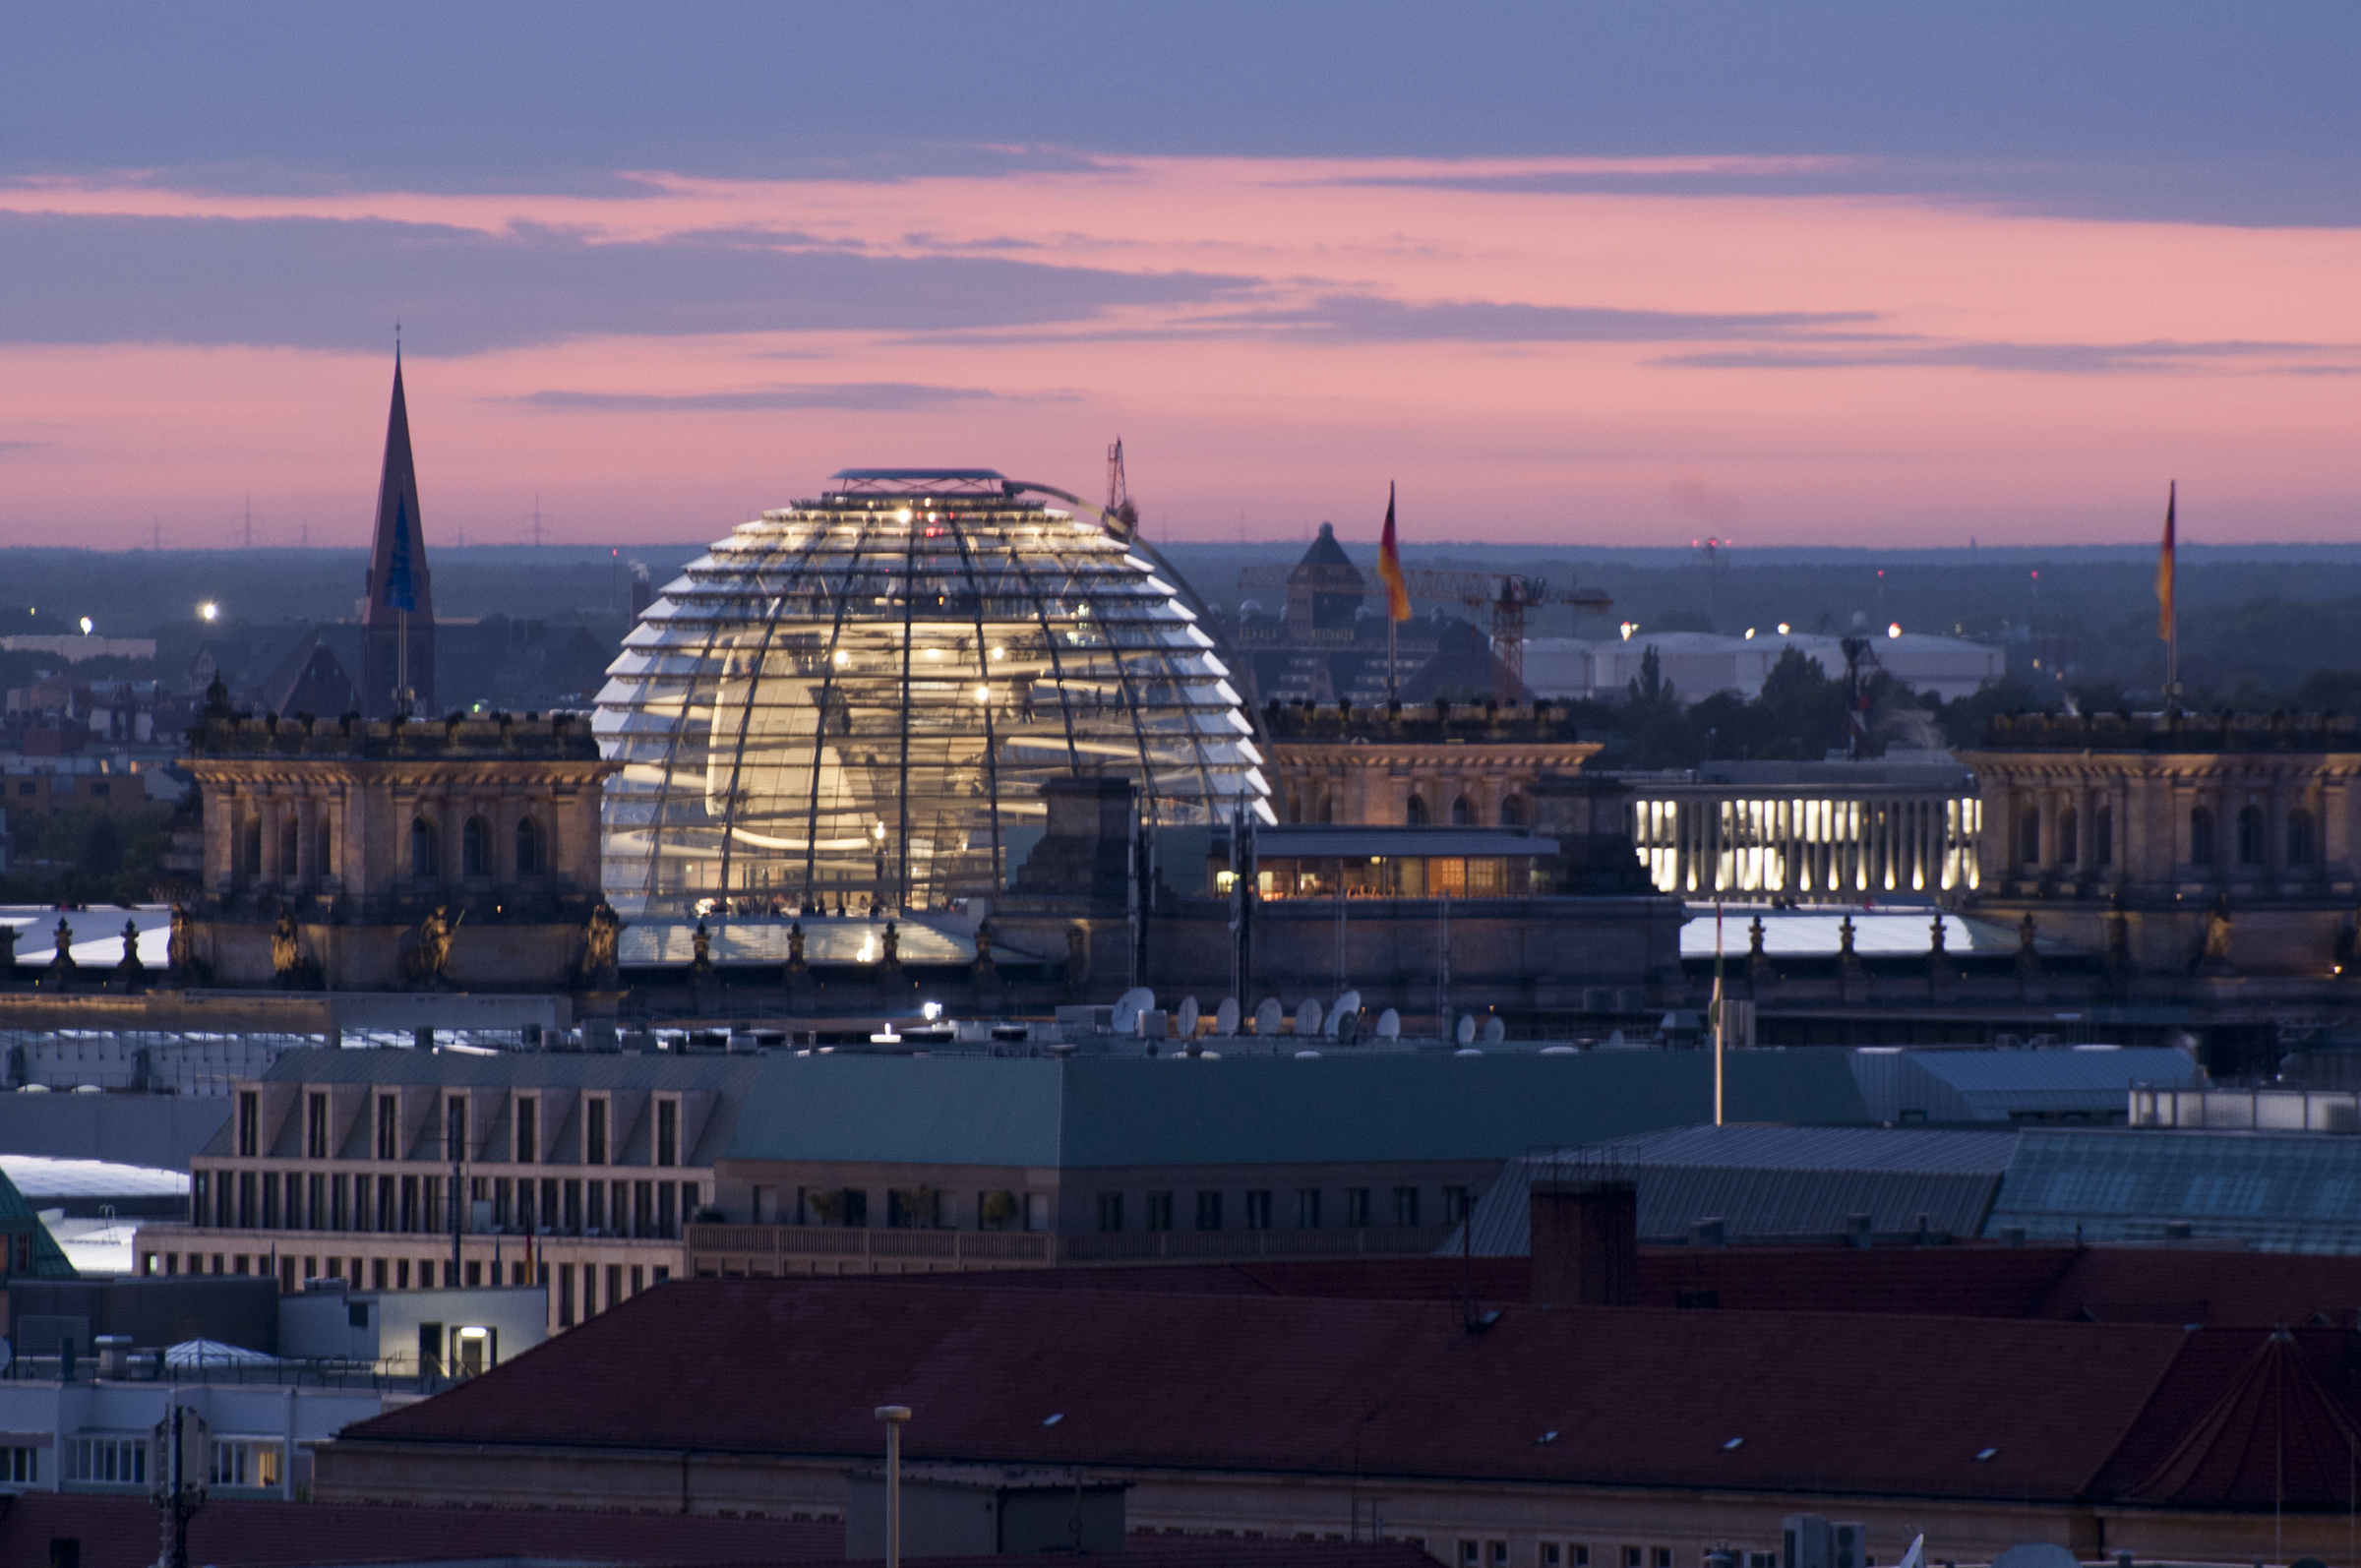 Views across Berlin including the Reichstag dome